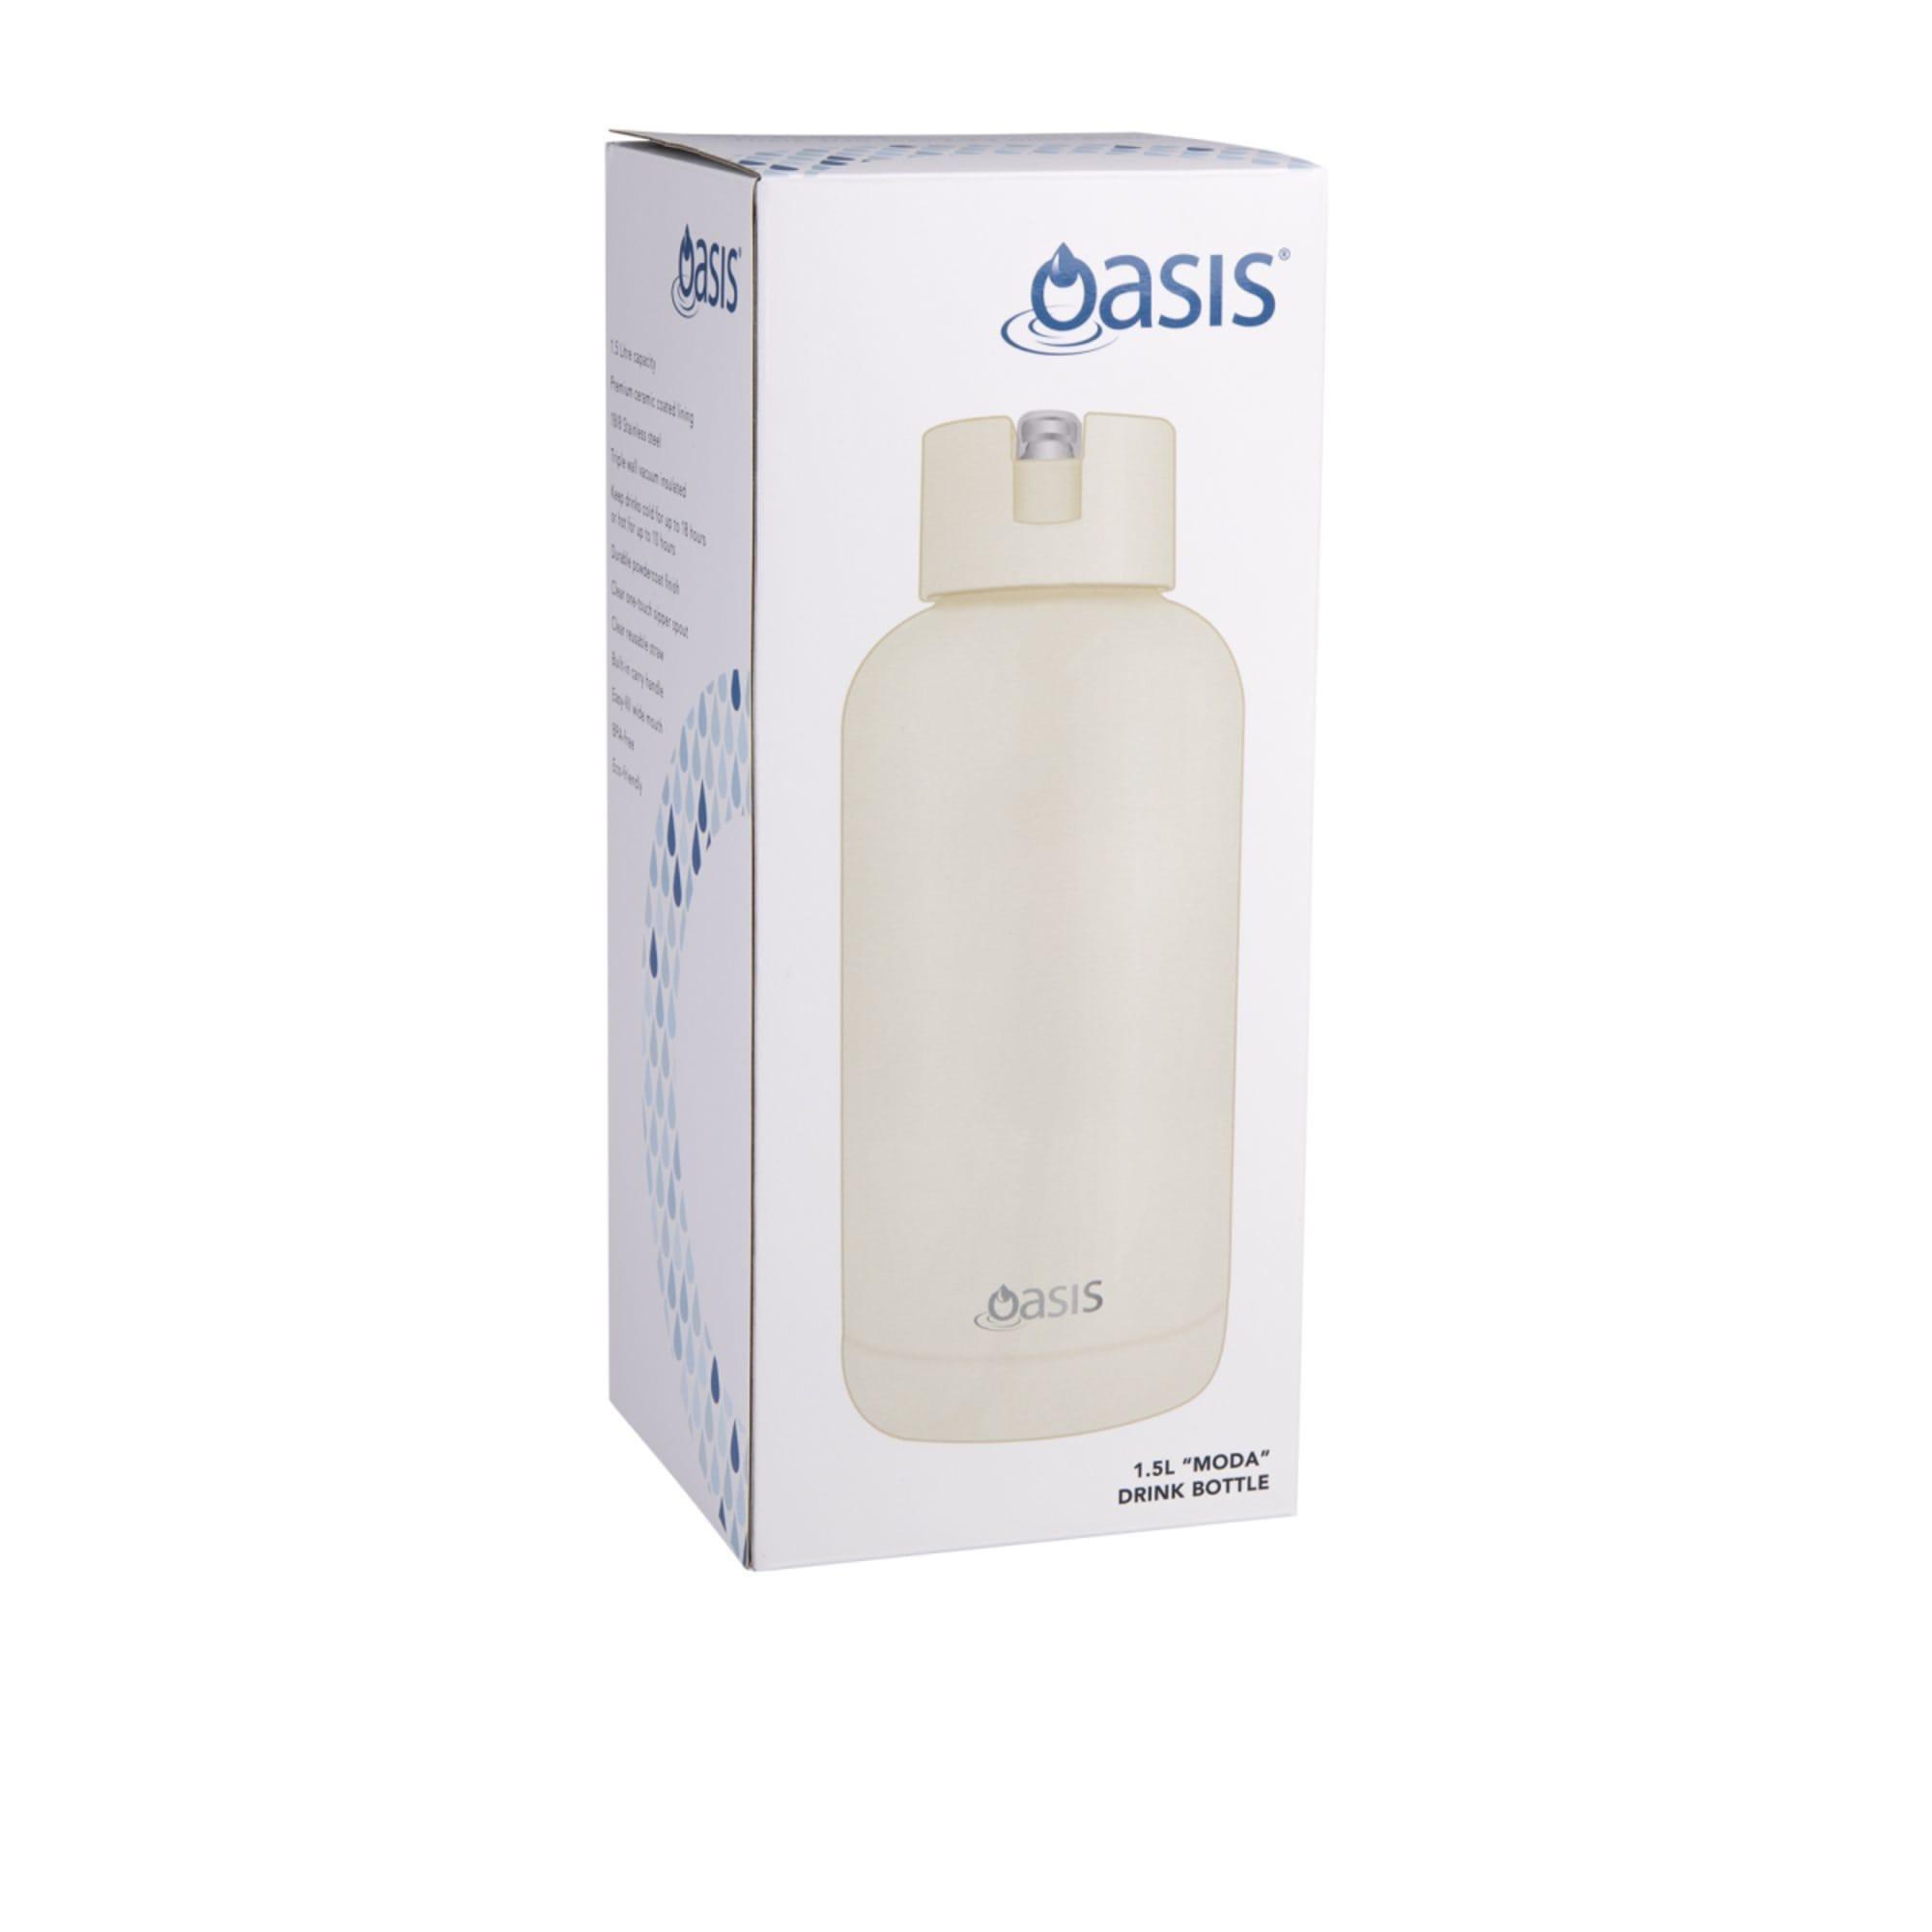 Oasis Moda Triple Wall Insulated Drink Bottle 1.5L Alabaster Image 10